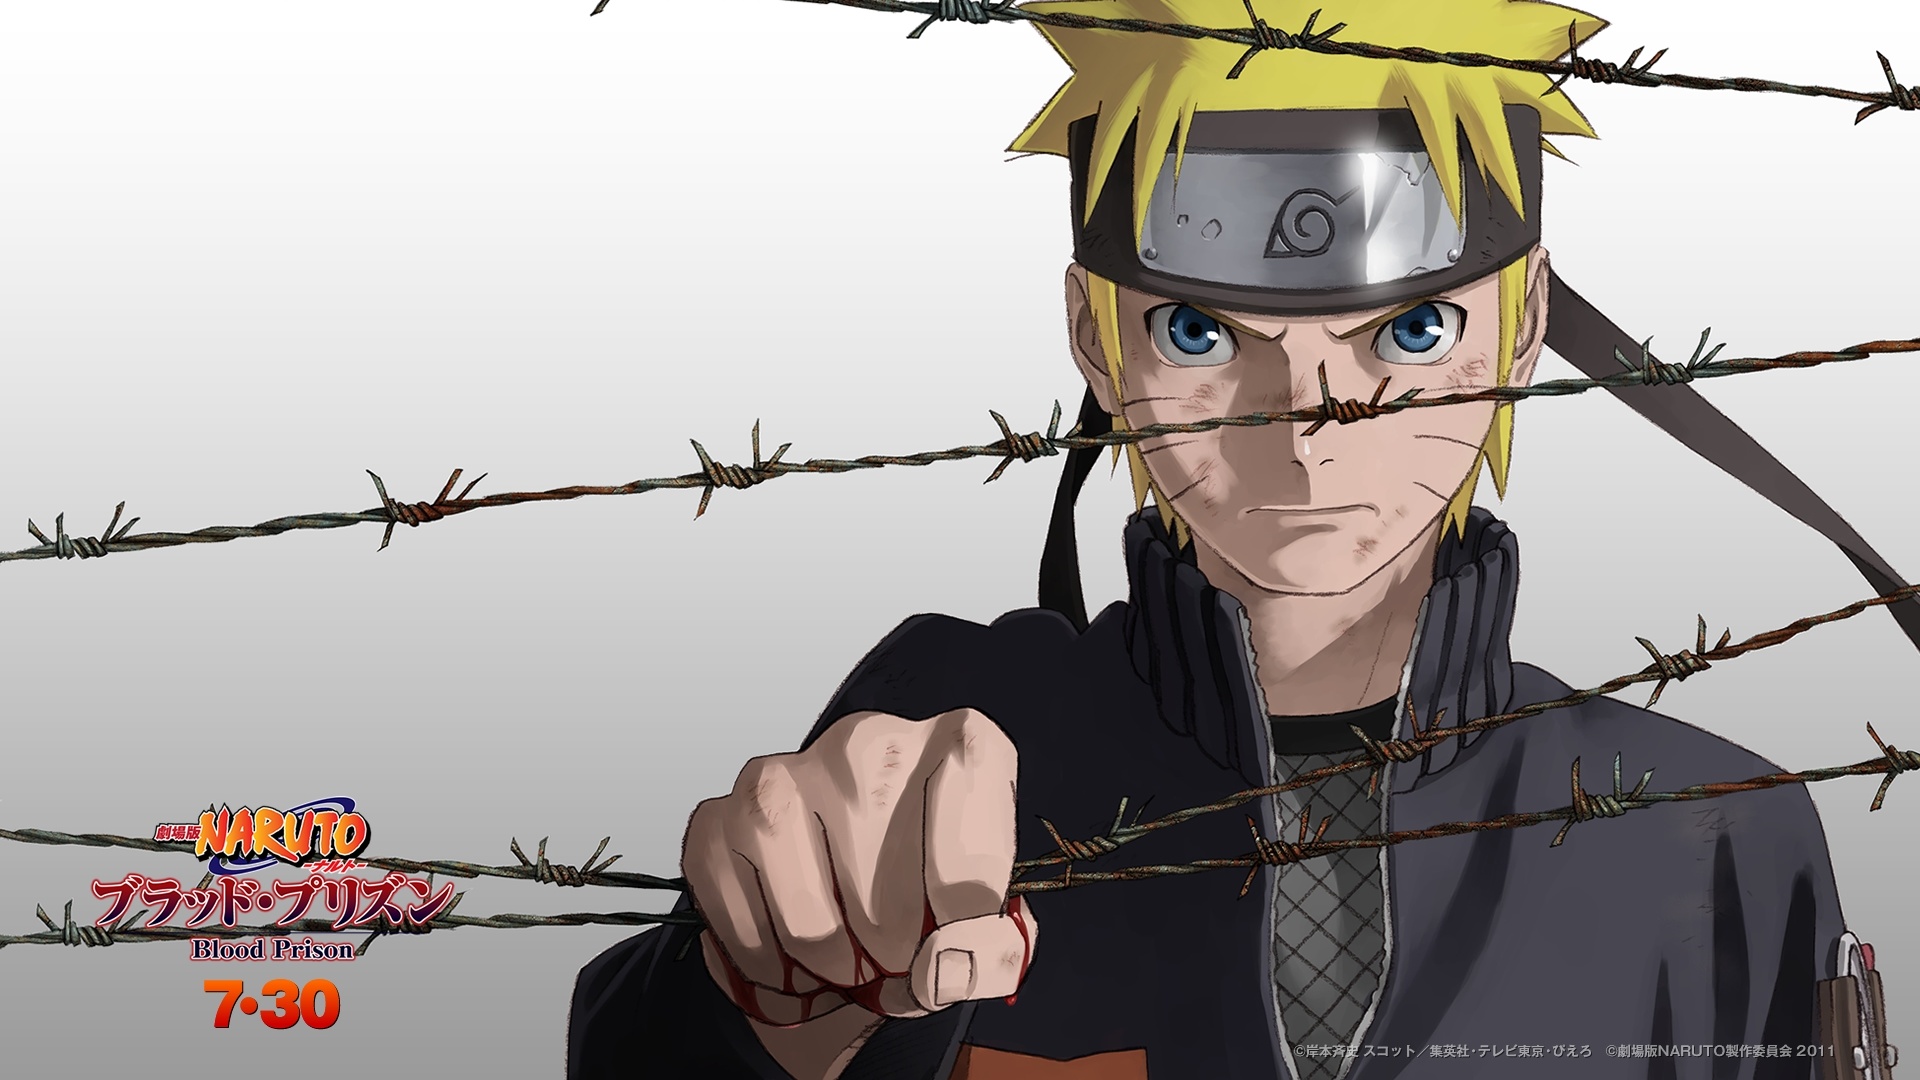 Download wallpaper for 1280x720 resolution | Naruto Cover Anime | anime |  Wallpaper Better